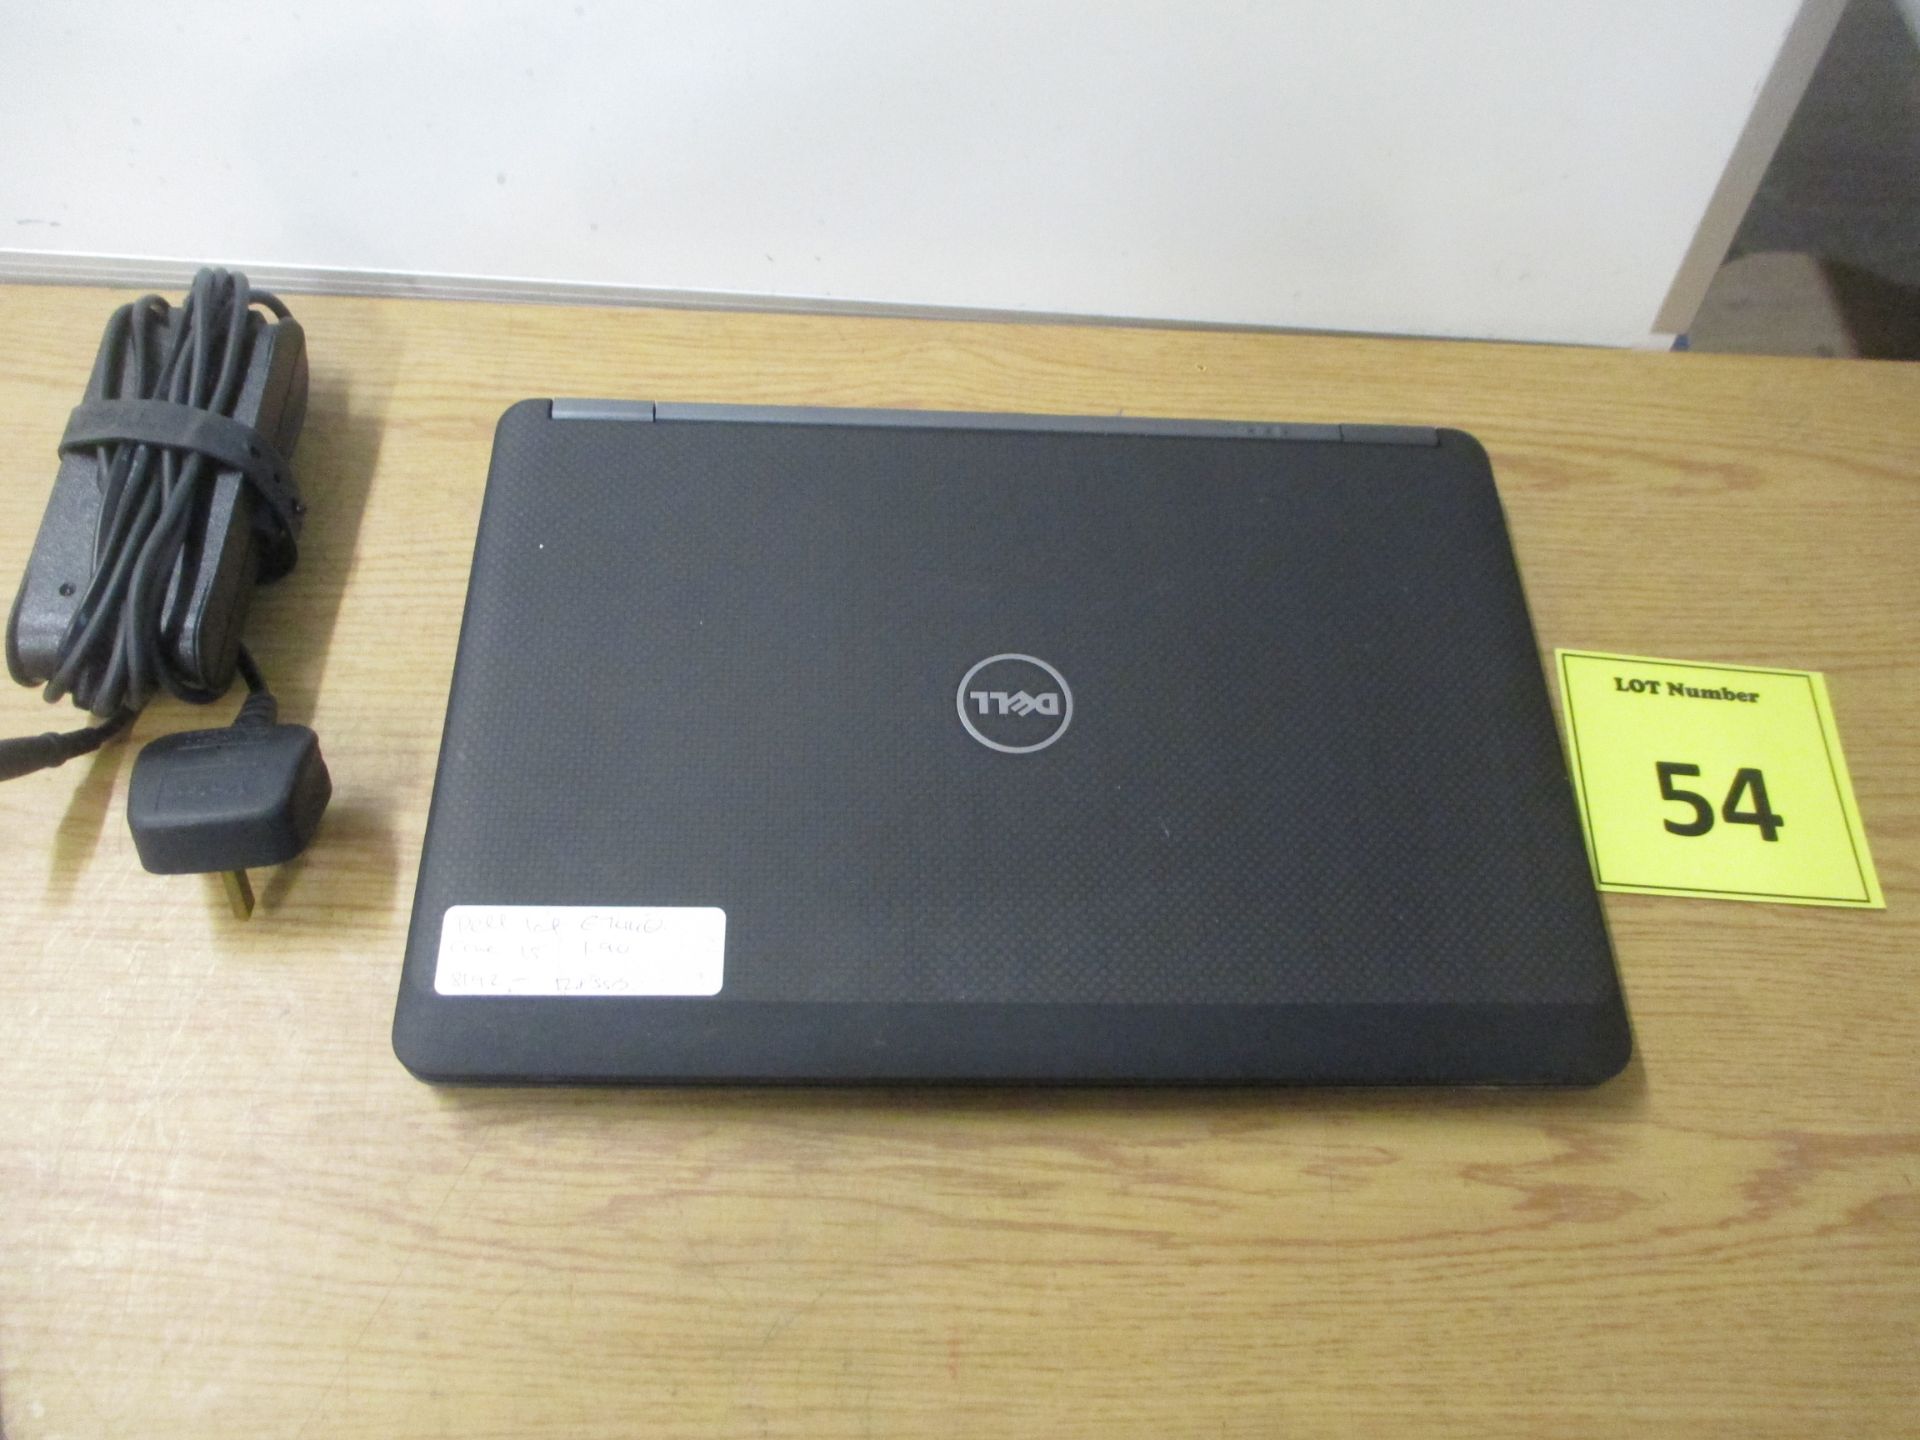 DELL LATITUDE E7440 LAPTOP. CORE i5 1.9 GHZ PROCESSOR, 8GB RAM, 128GB SOLID STATE HDD. WITH PSU & W8 - Image 2 of 2